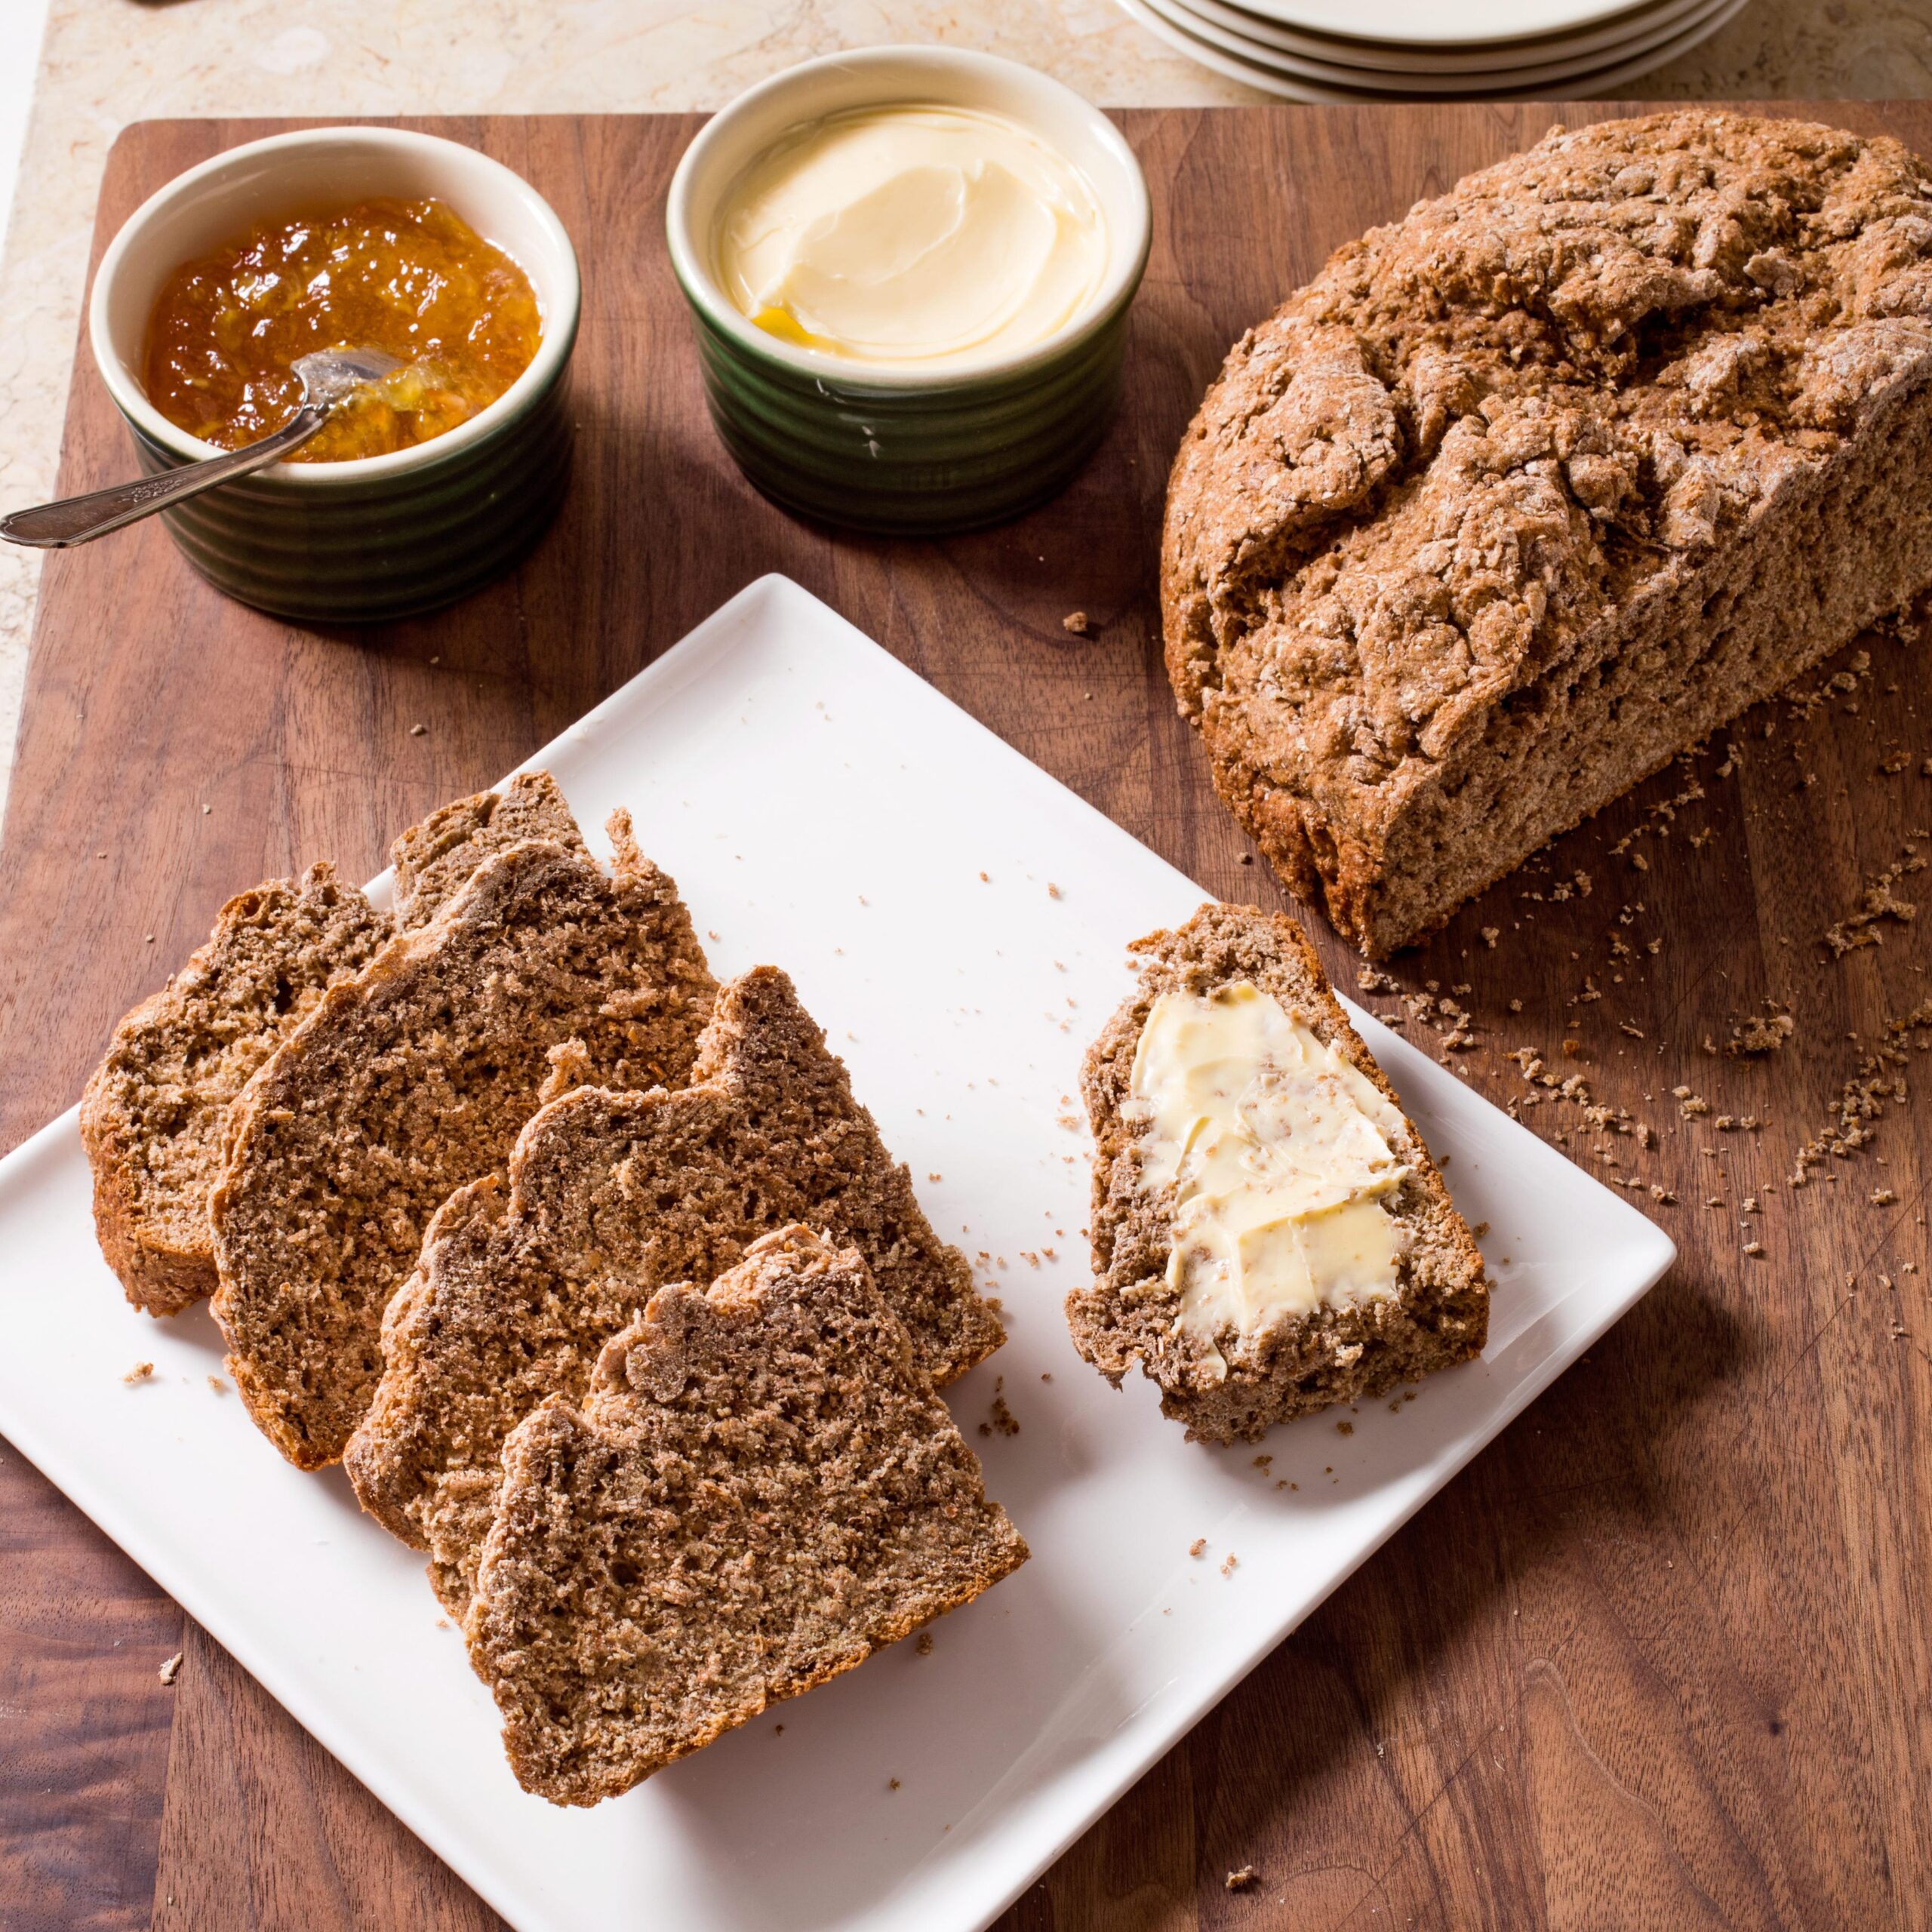  The aroma of freshly baked bread will fill your kitchen and heart as you prepare this recipe.